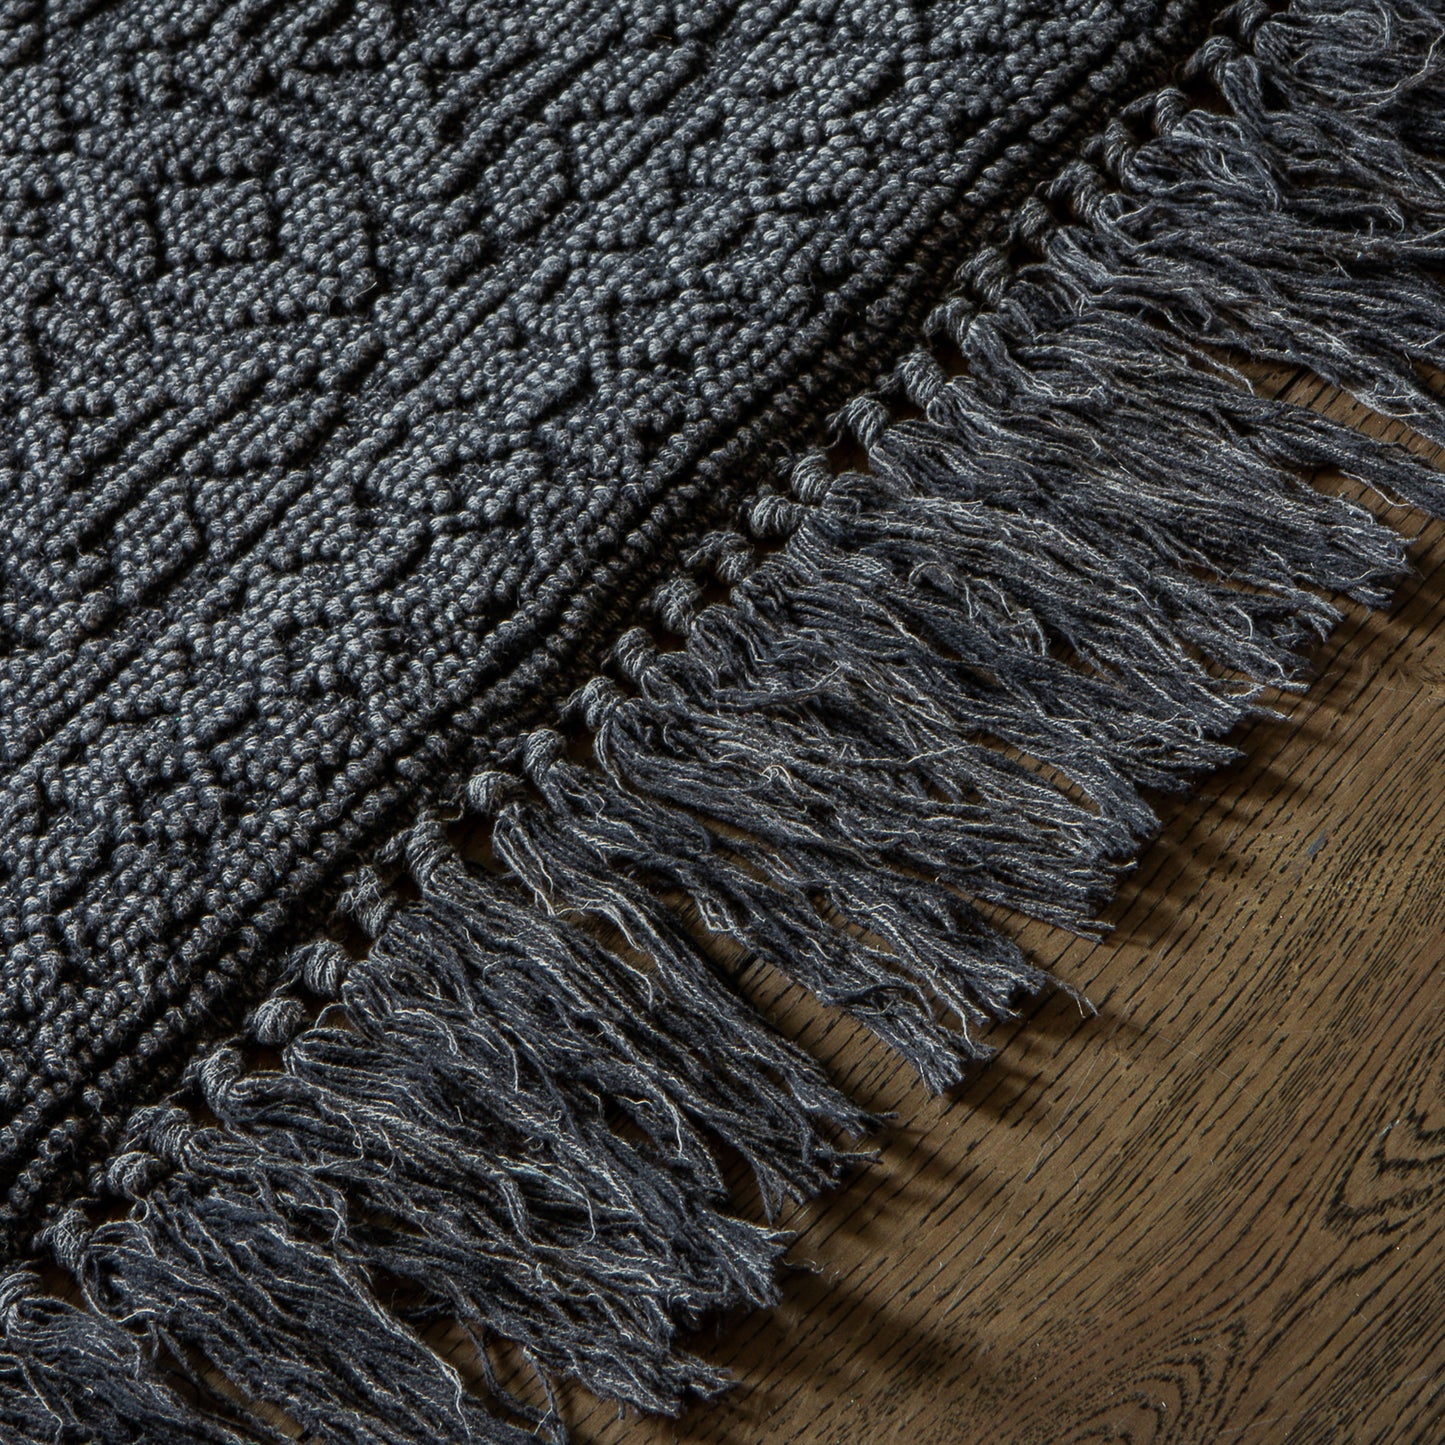 A charcoal rug with fringes on a wooden floor from Kikiathome.co.uk, adding warmth and style to your interior decor.